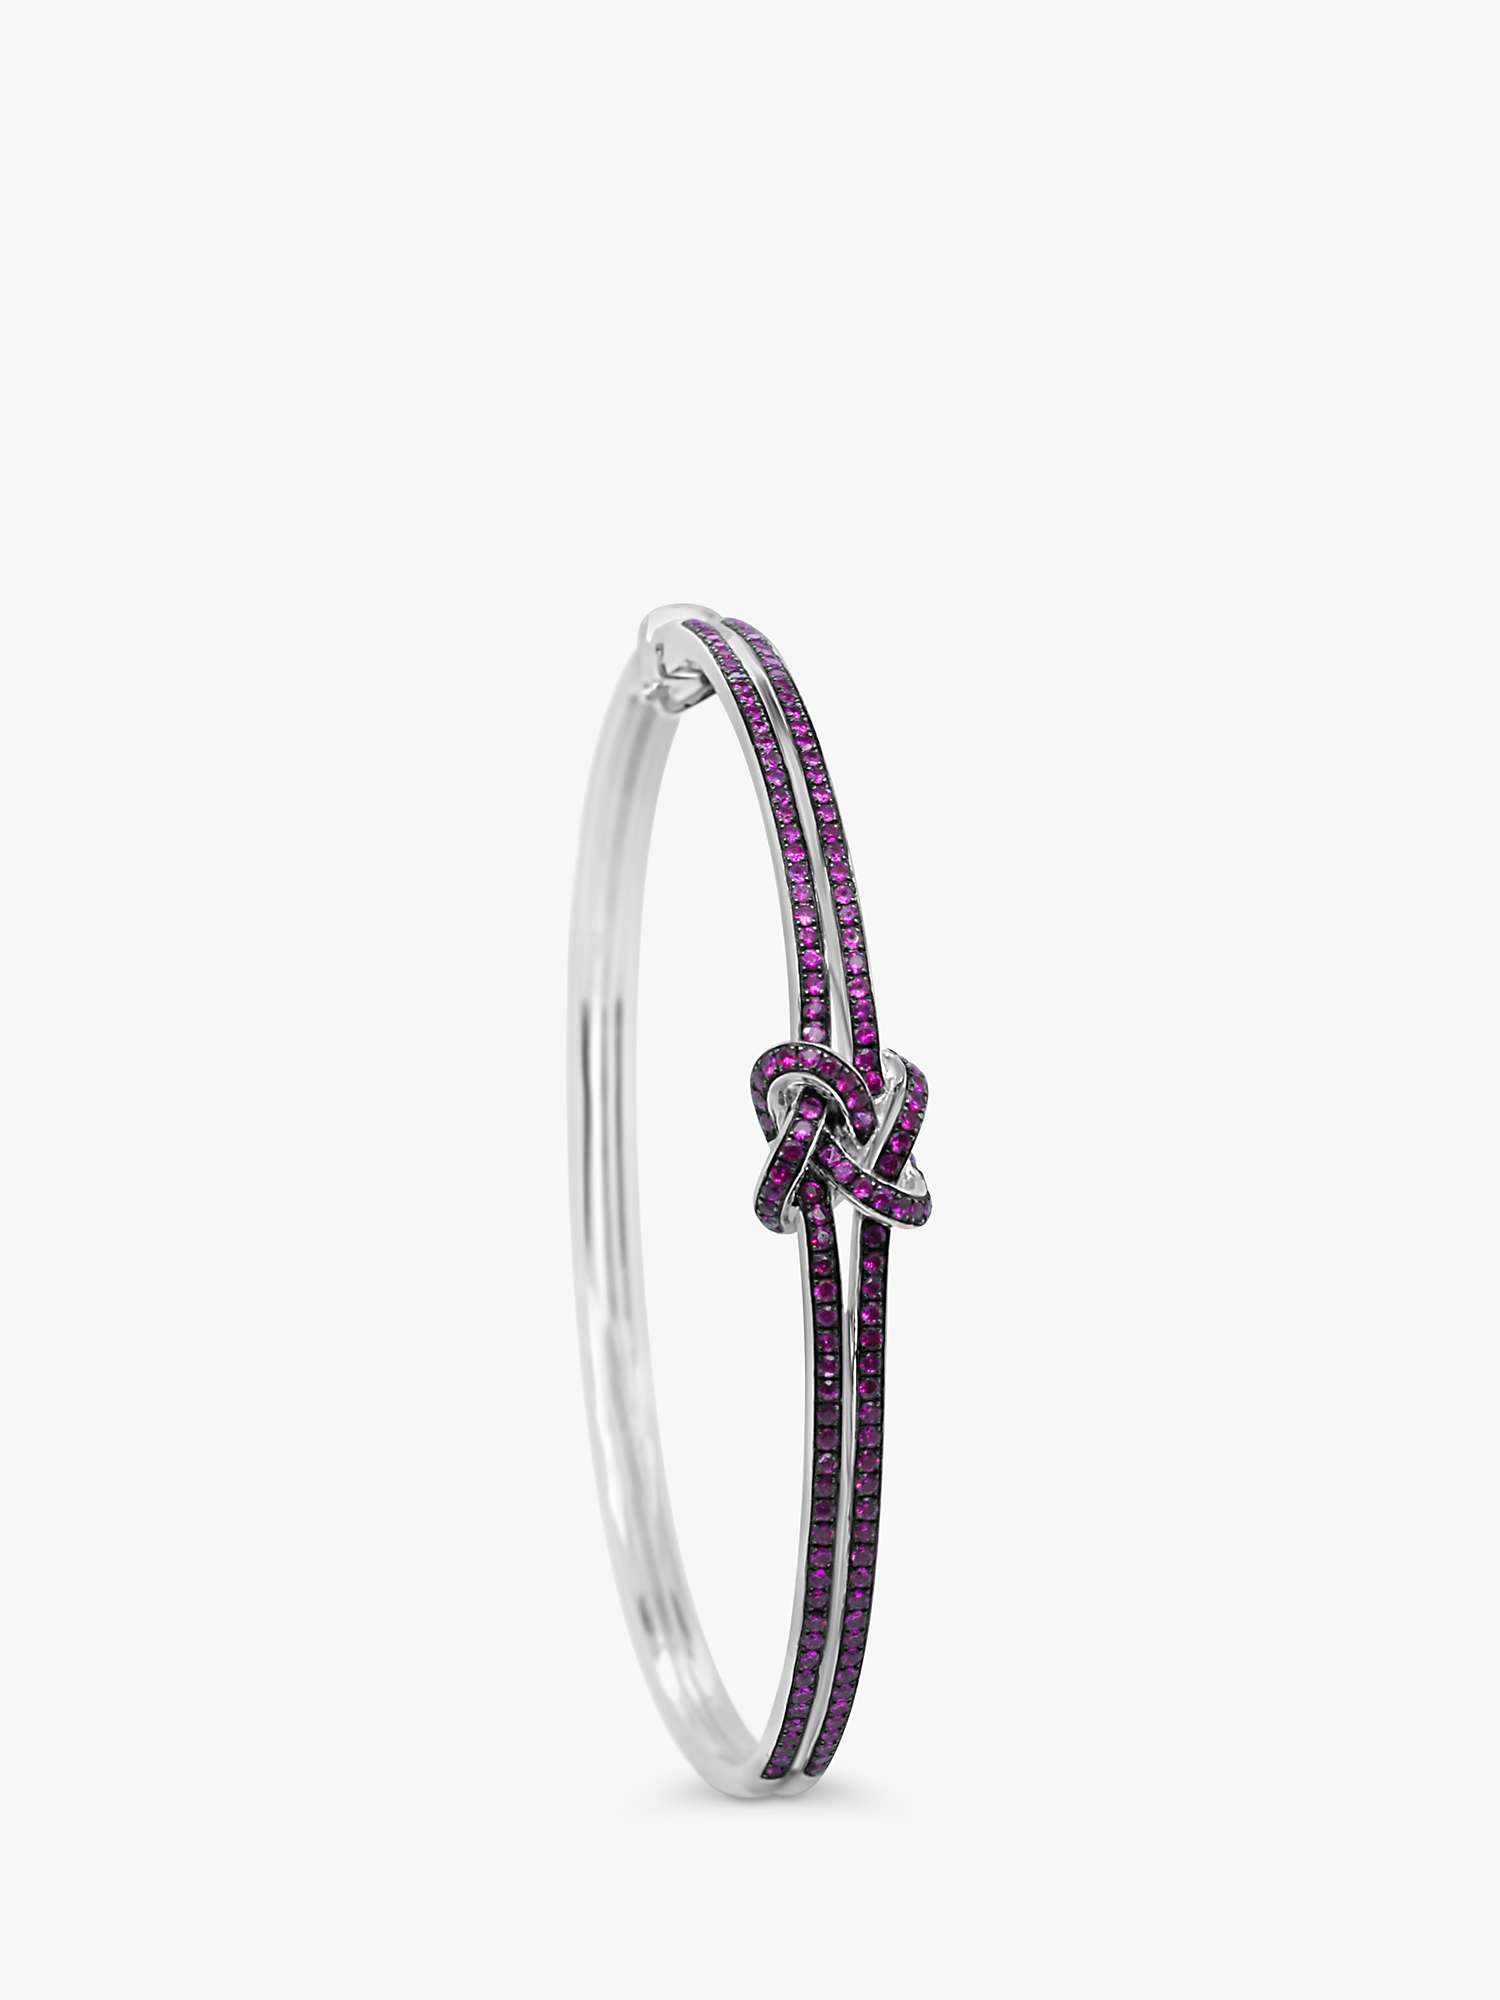 Buy Milton & Humble Jewellery Second Hand Theo Fennell 18ct White Gold Pink Sapphire Bangle, Dated London 2007 Online at johnlewis.com